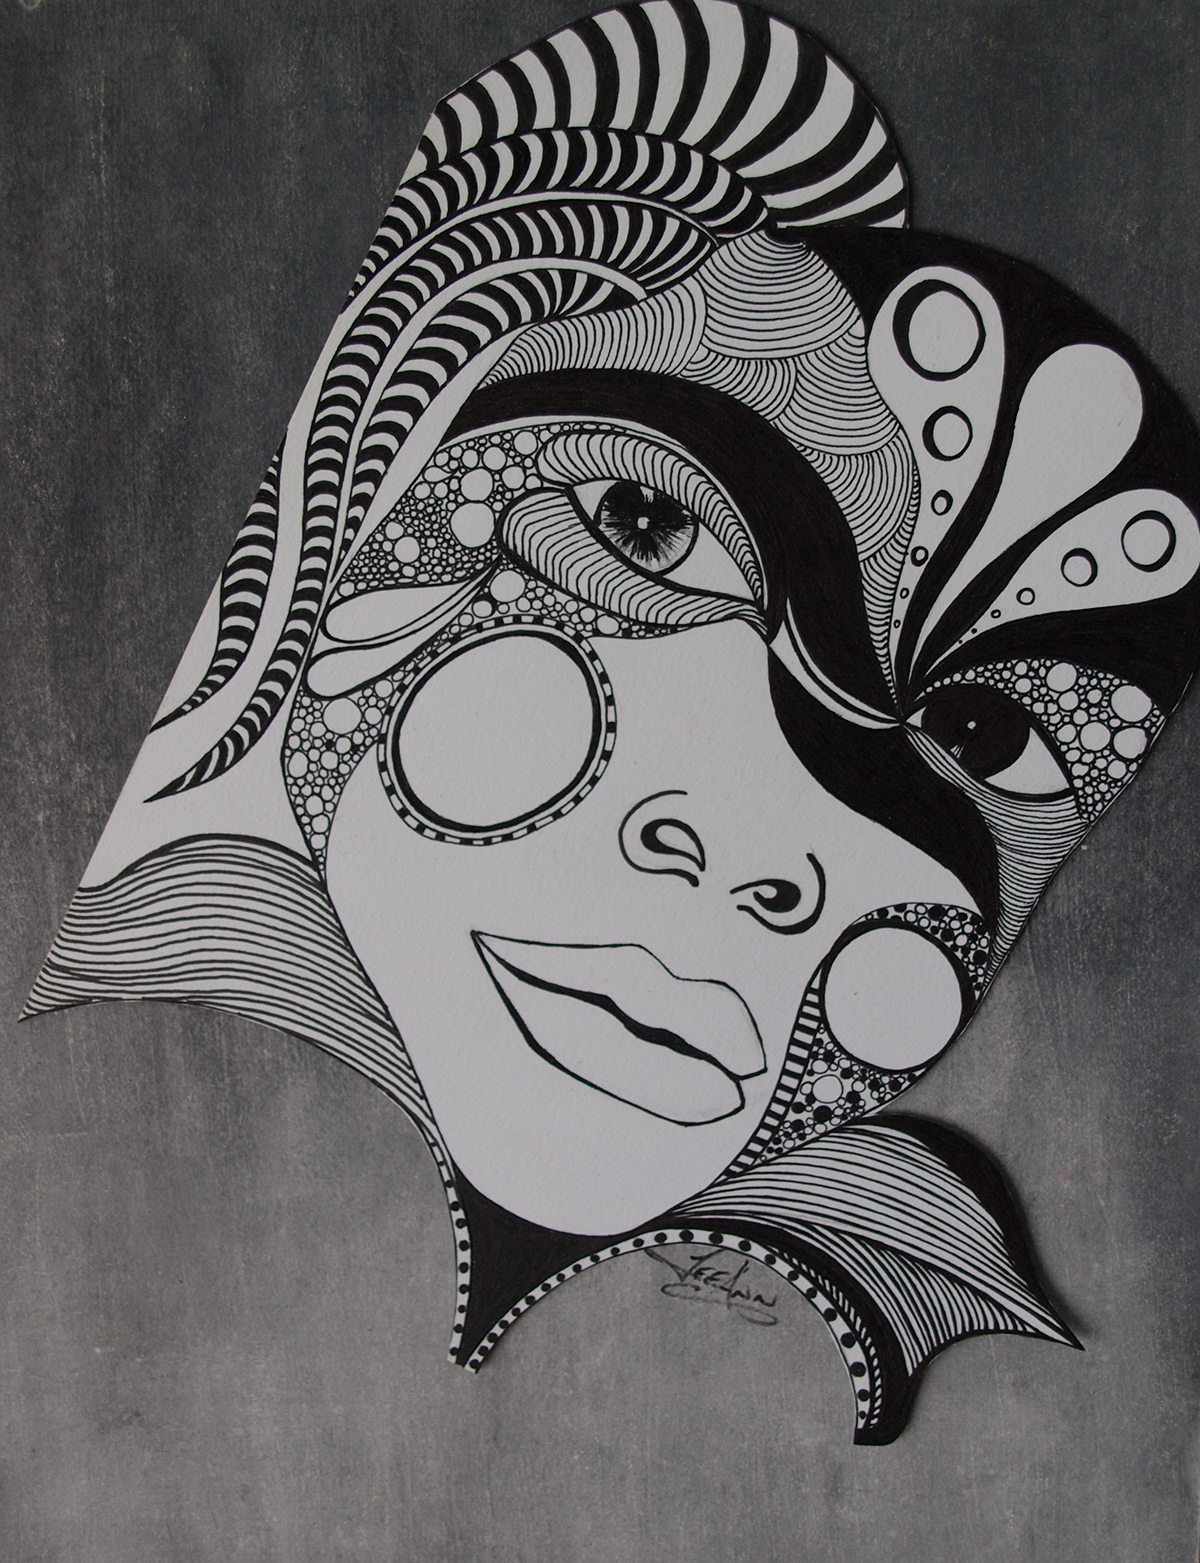 face  portrait clown jester black White leeannalexander zentangle doodle whimsey abstract